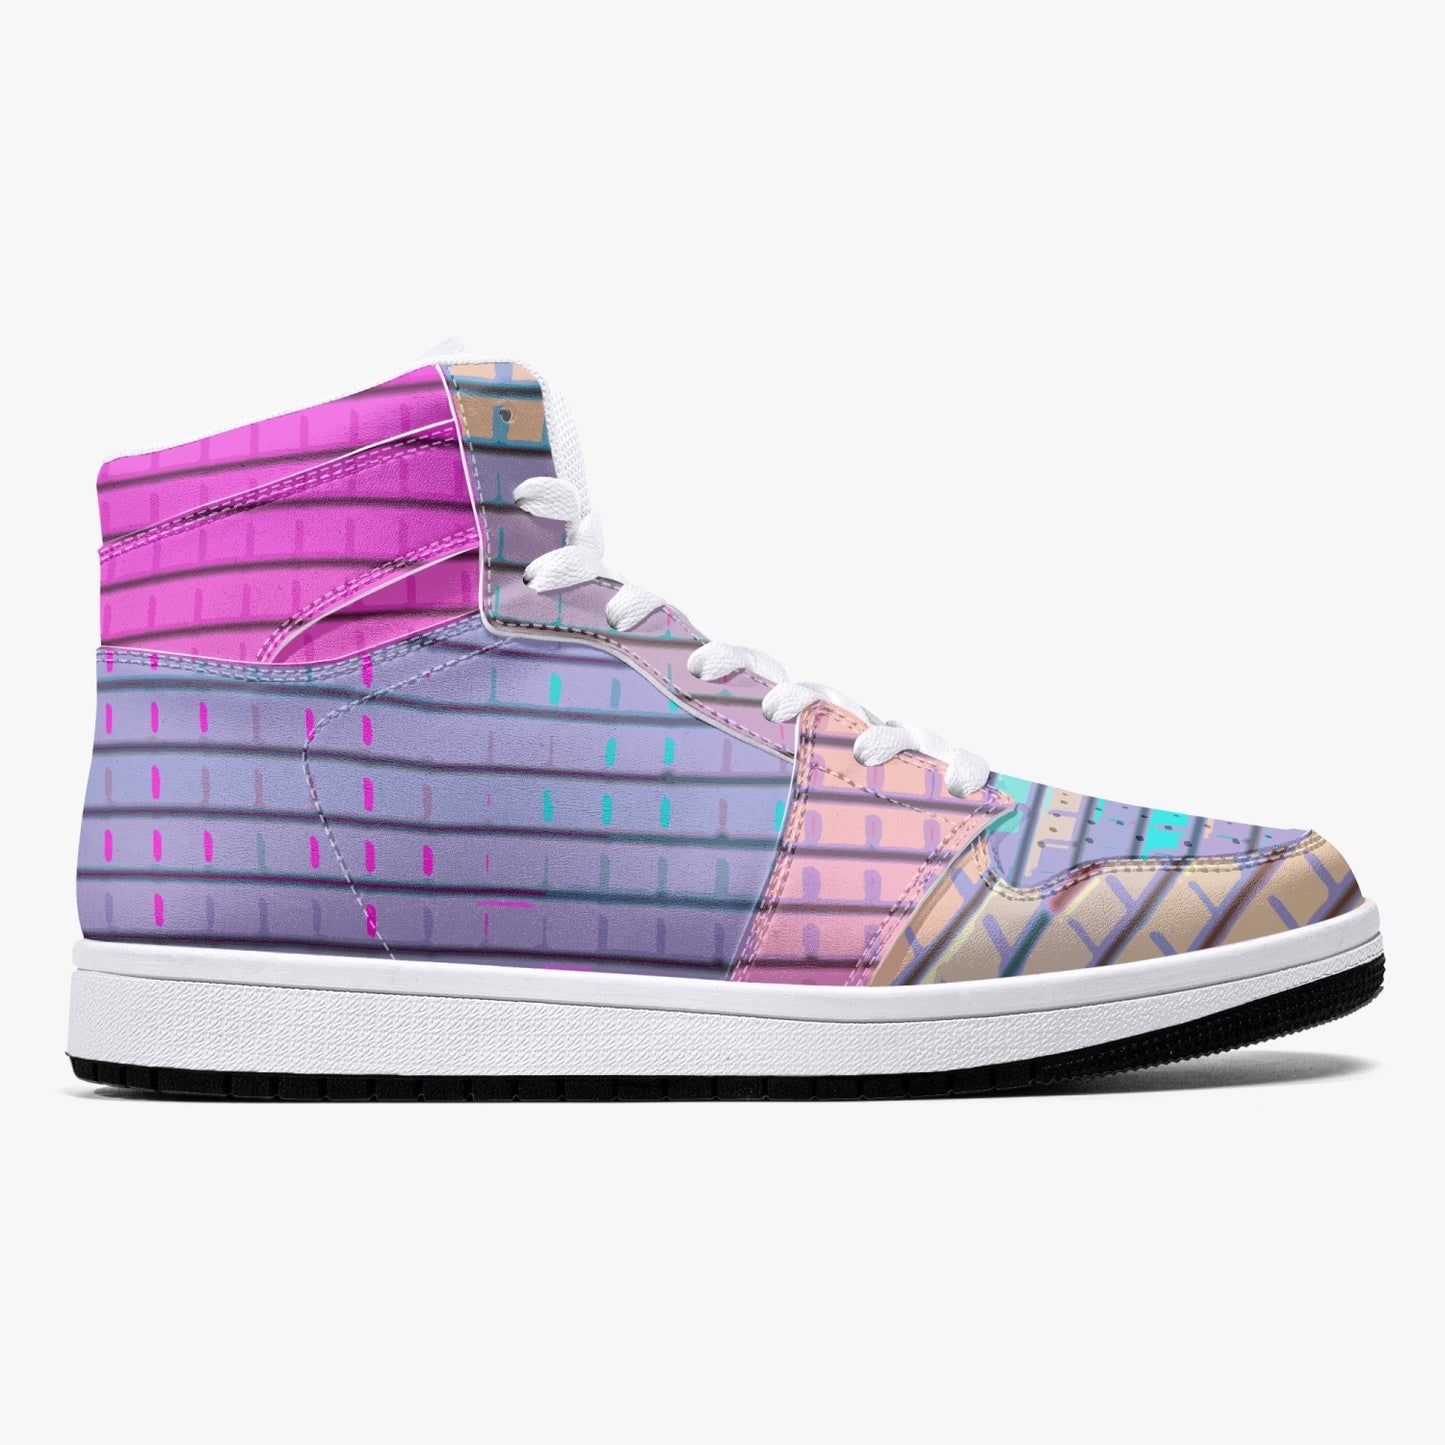 Almost Pink - Macr.in (High-Top Leather Sneakers)